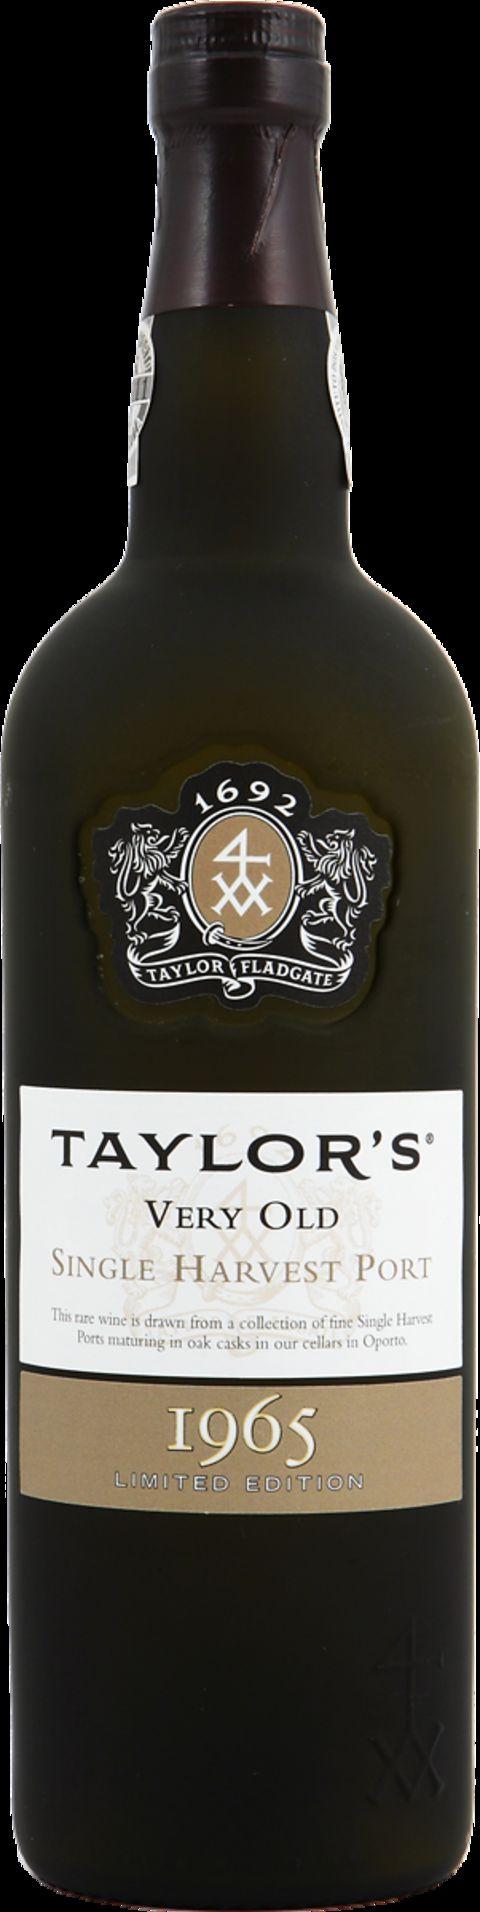 01.01.17.11 Porto 1965 Single Harvest Port Taylor, Fladgate & Yeatman S.A. Taylors extensive cask aged reserves include a collection of very rare and valuable Single Harvest Ports.